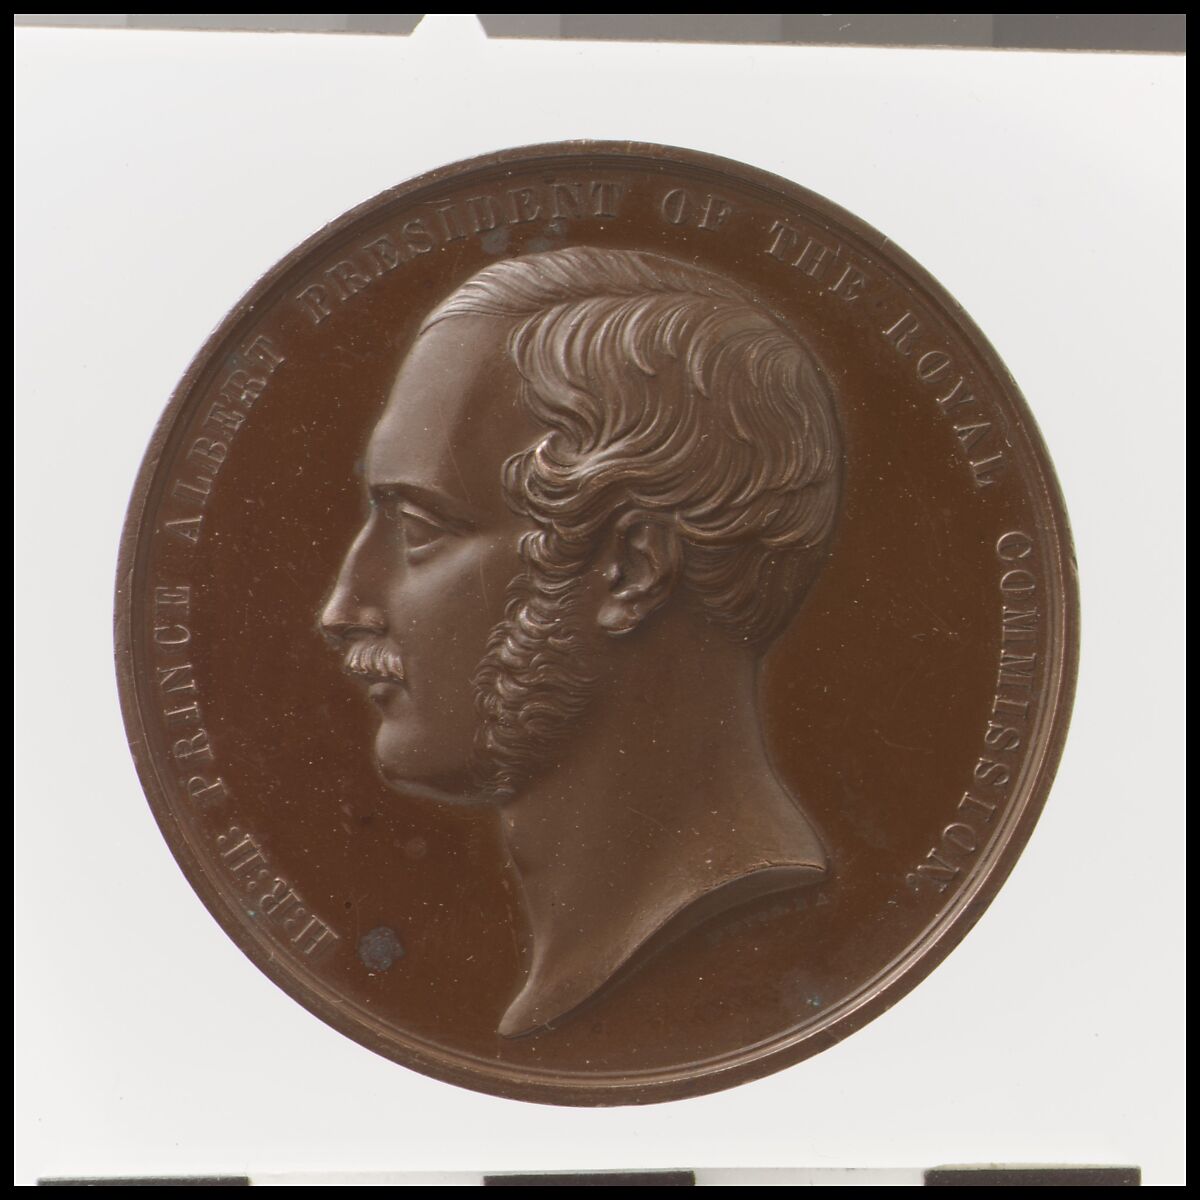 Prince Albert, President of the Royal Commission for the Great Exhibition, Medalist: William Wyon (British, Birmingham 1795–1851 Brighton), Bronze, British 